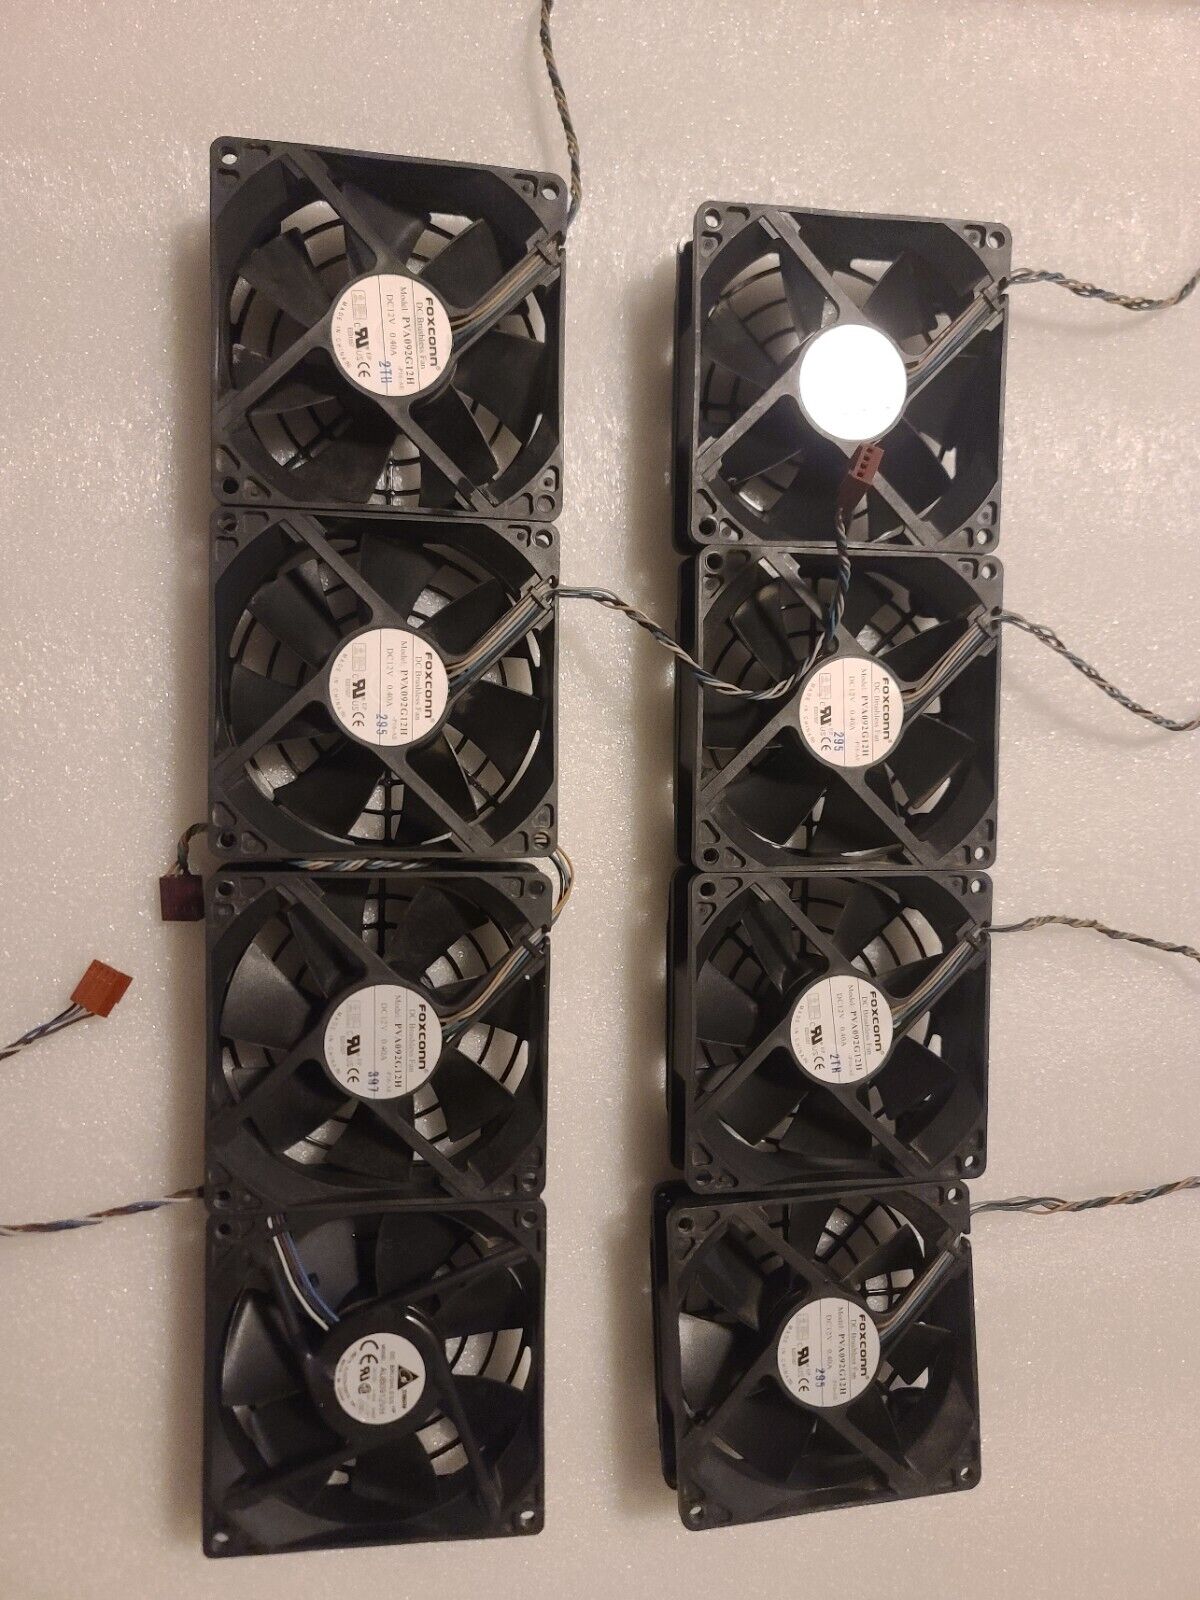 8 x Computer Case fans Foxconn 7x PVA092G12H and  1x AuB0912VH Cooling 92mm...